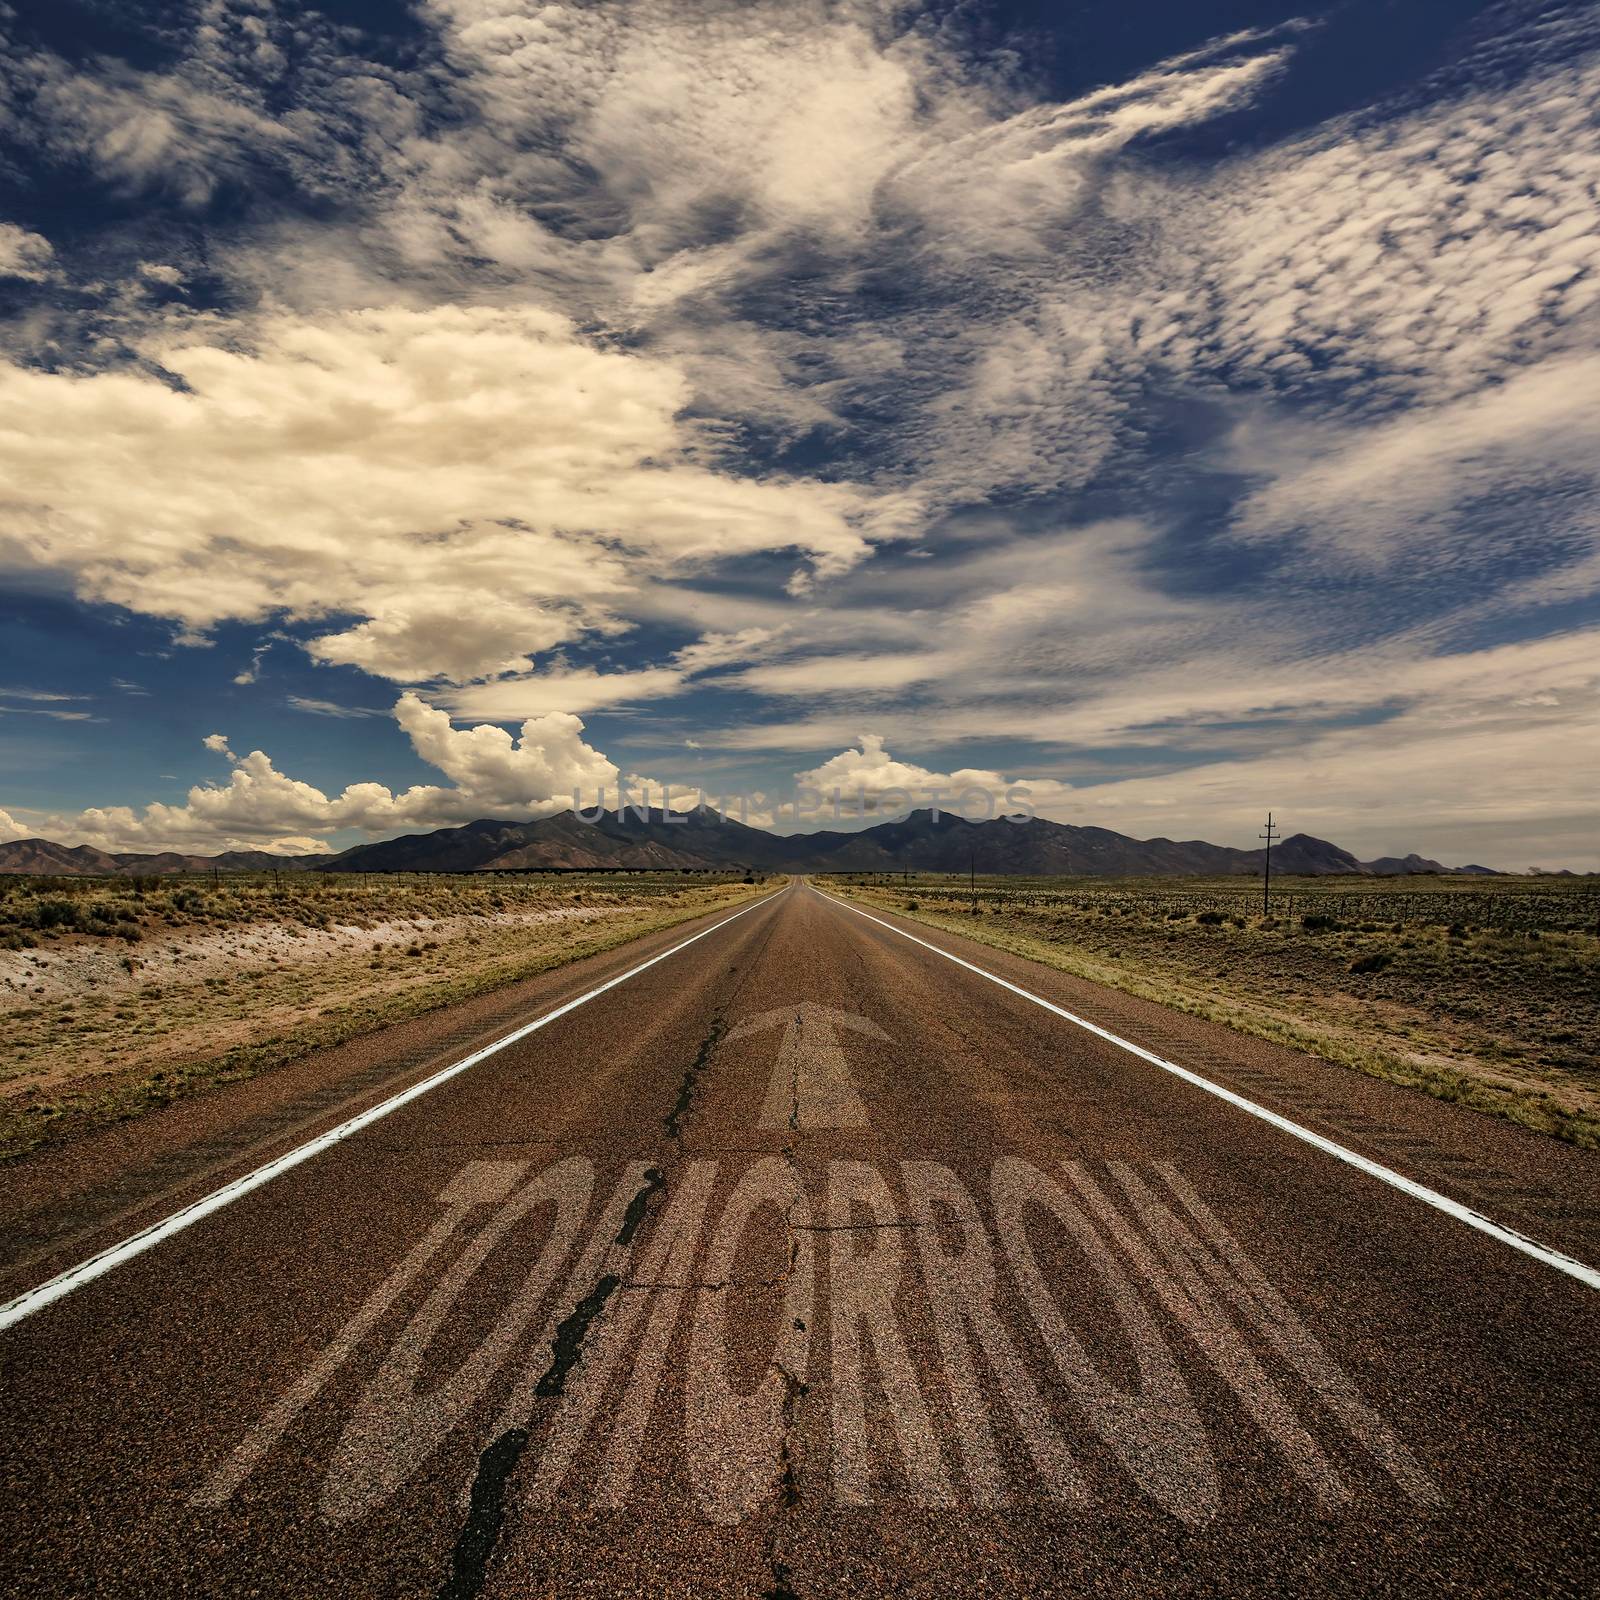 Conceptual image of desert road with the word tomorrow and arrow